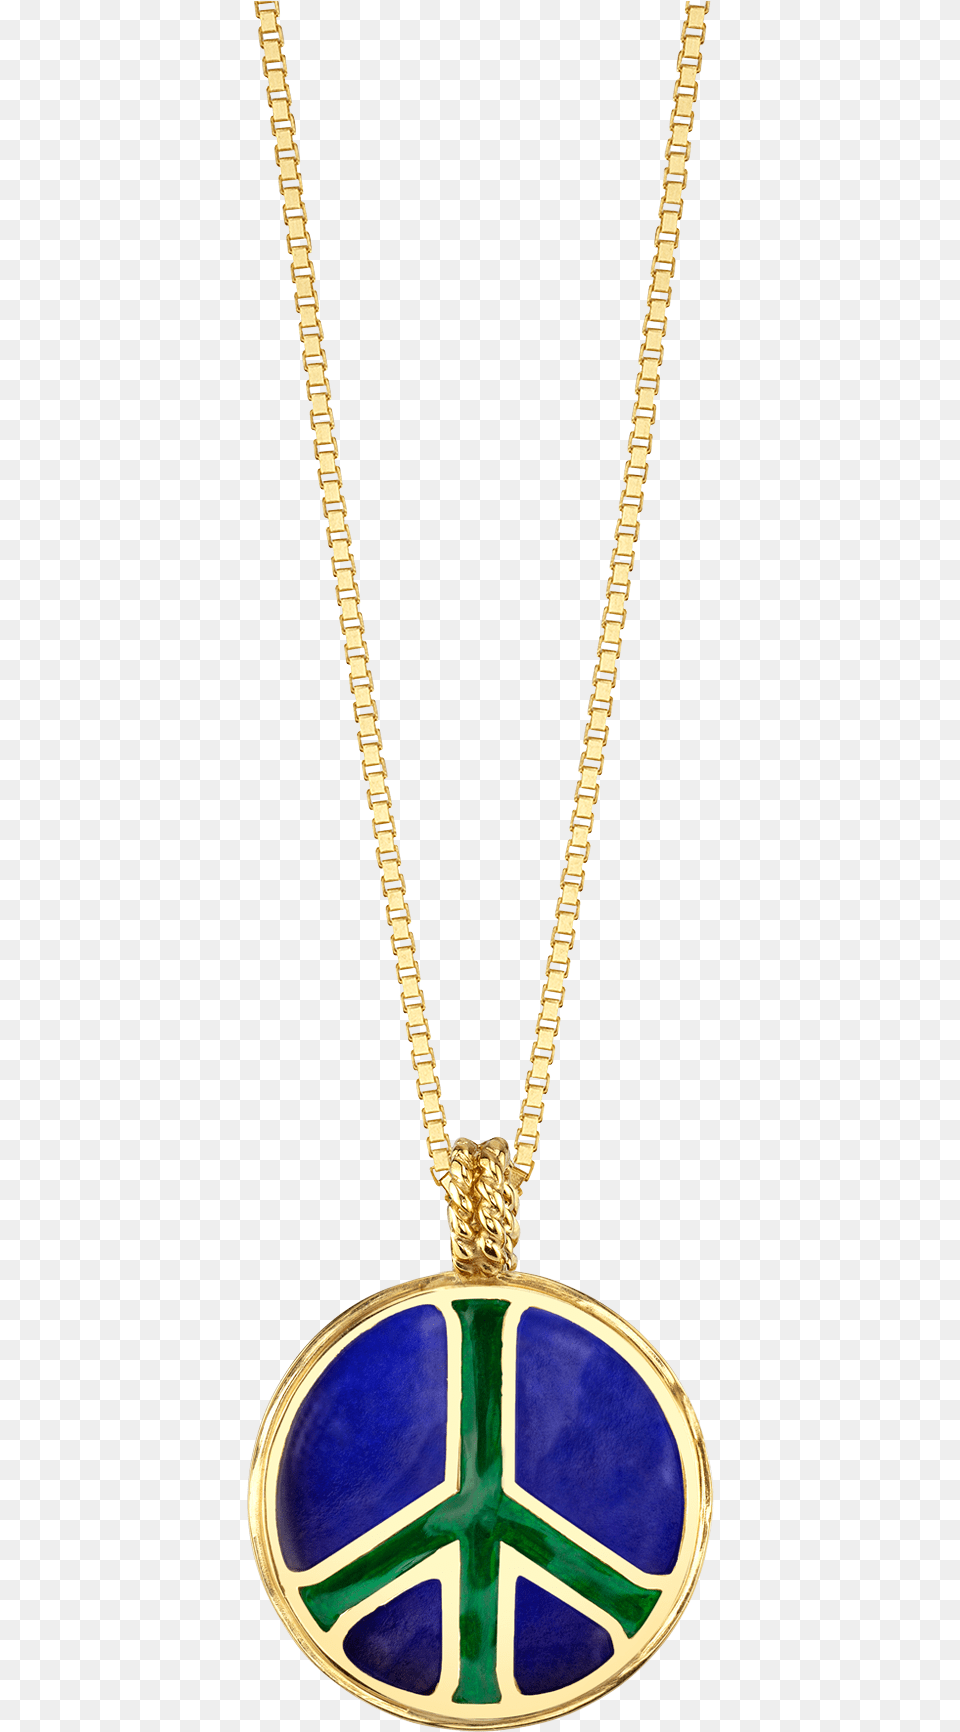 Peace Sign Necklace Necklace, Accessories, Gemstone, Jewelry, Pendant Png Image